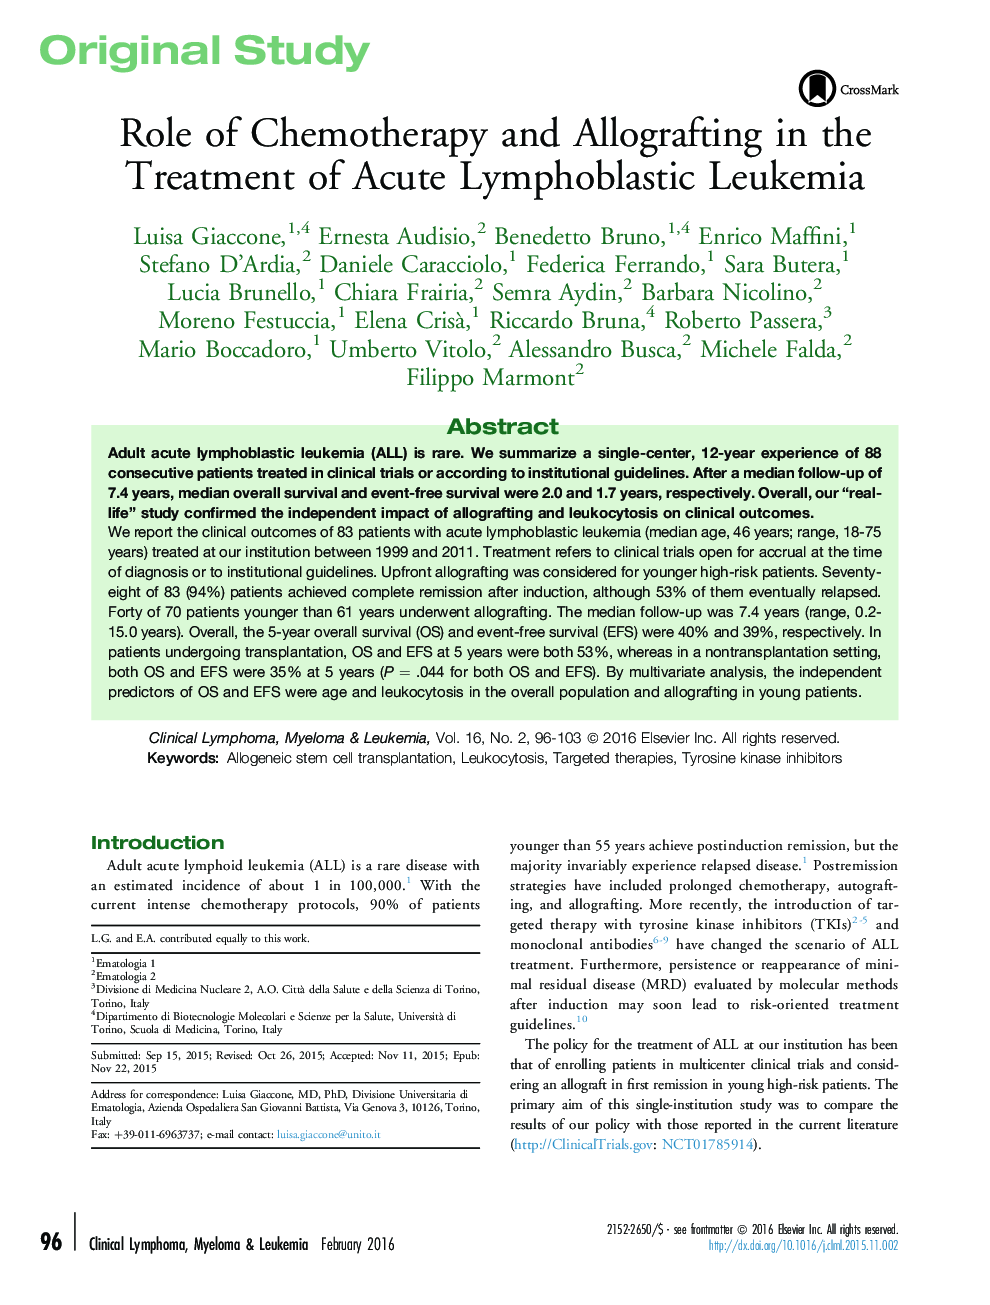 Role of Chemotherapy and Allografting in the Treatment of Acute Lymphoblastic Leukemia 